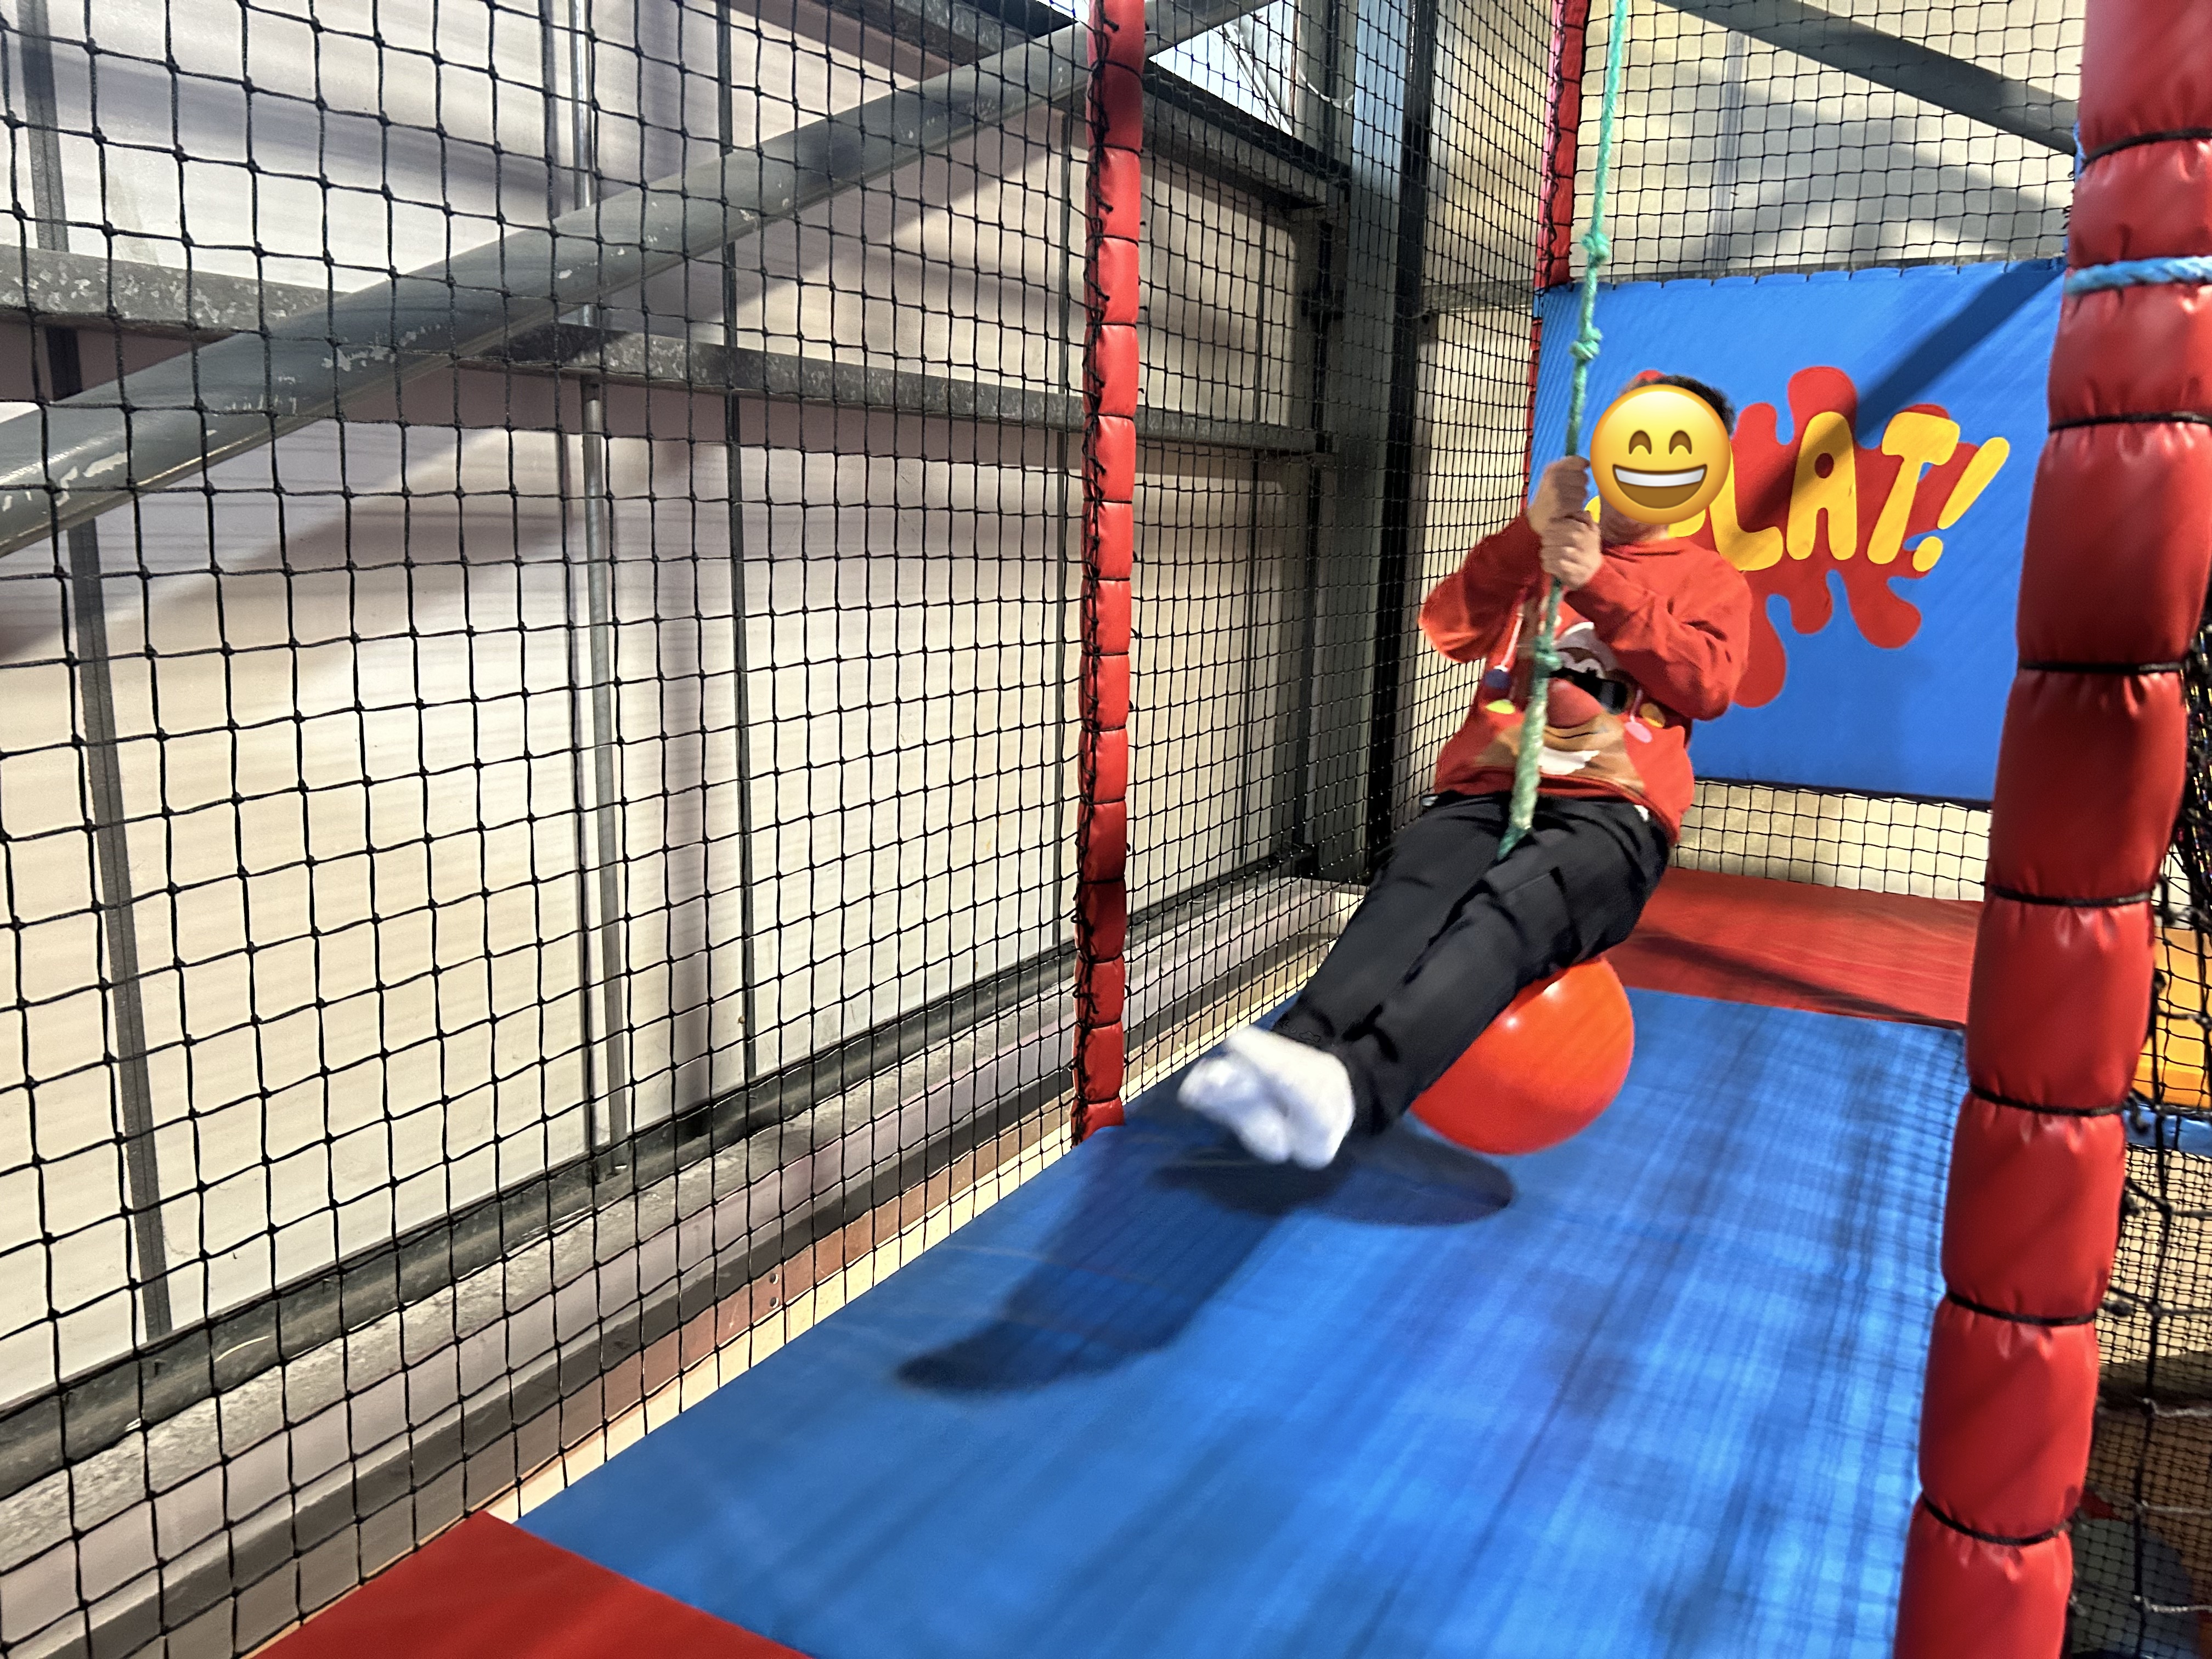 C rides the soft play zipline from the Splat zone!